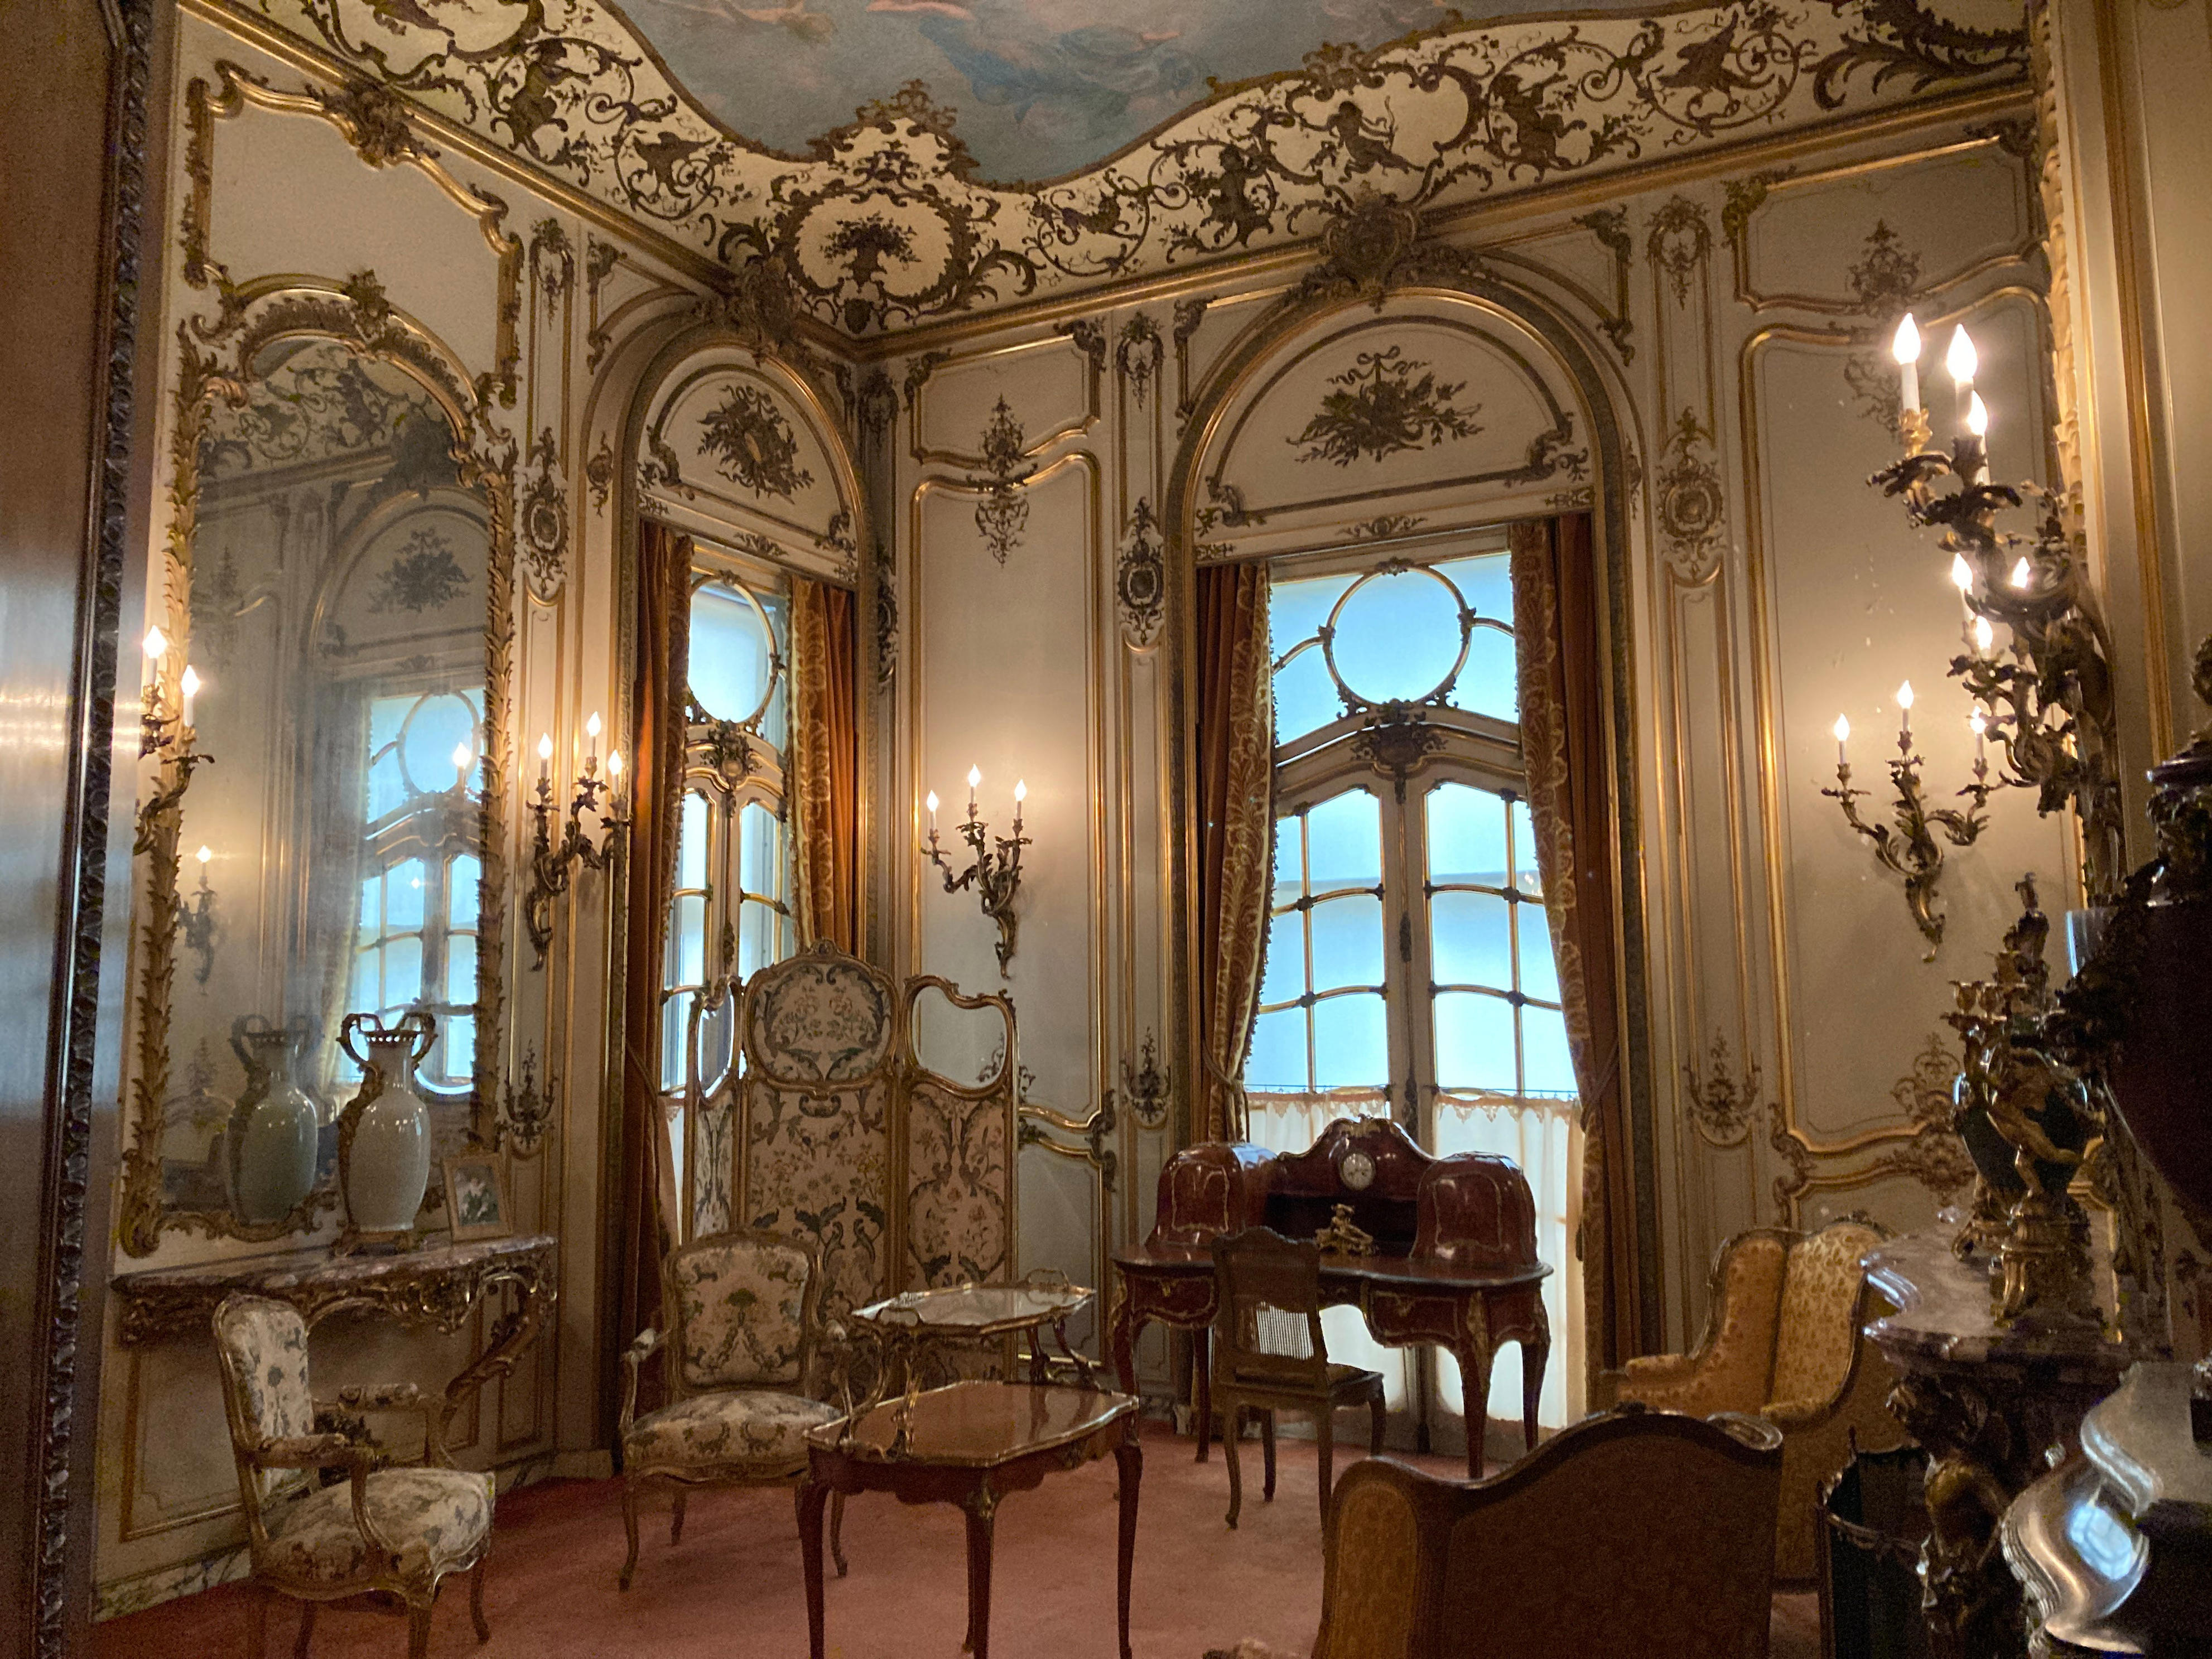 <p>Frederick and Louise had a permanent residence in Paris, which inspired the Louis XIV-style decor.</p><p>Vanderbilt butler Alfred Martin told the <a href="https://www.nps.gov/vama/learn/historyculture/reception-room.htm">National Park Service</a> that when the door to the salon was closed, "that was a sure indication that Mrs. Vanderbilt did not want to be disturbed."</p>